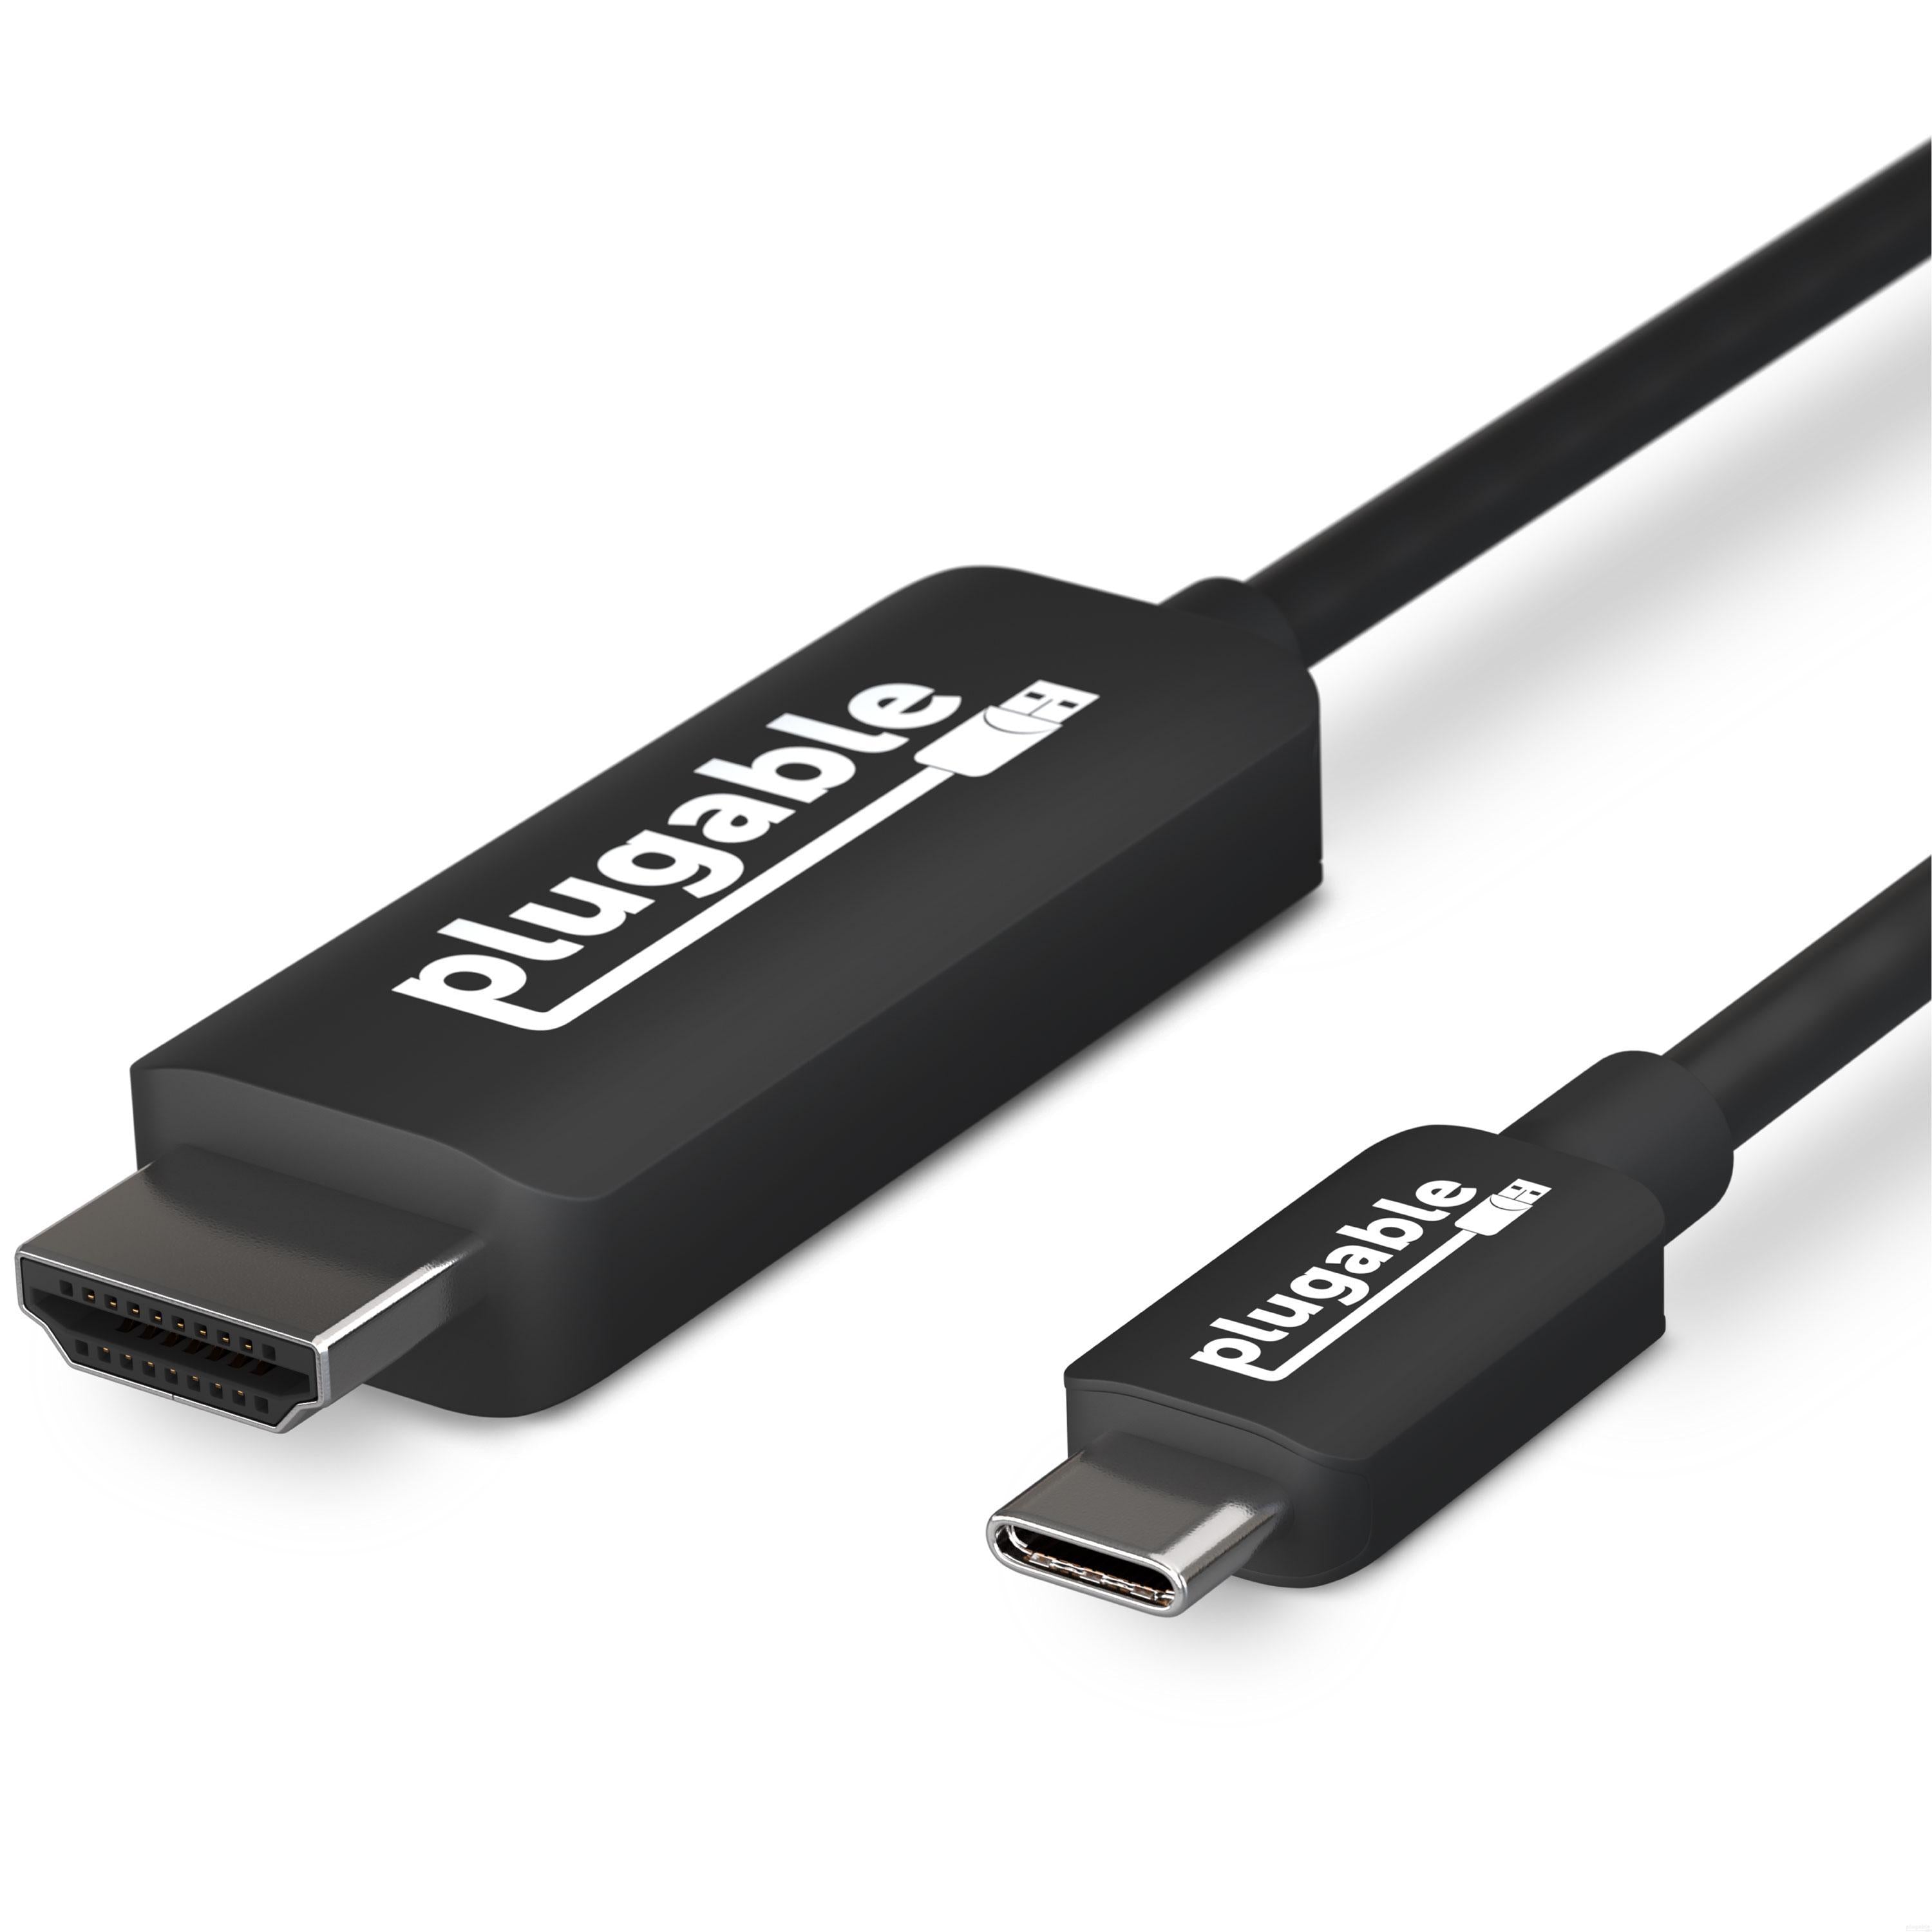 Omsorg Terapi At søge tilflugt Plugable USB 3.1 Type-C to HDMI 2.0 Cable – Plugable Technologies